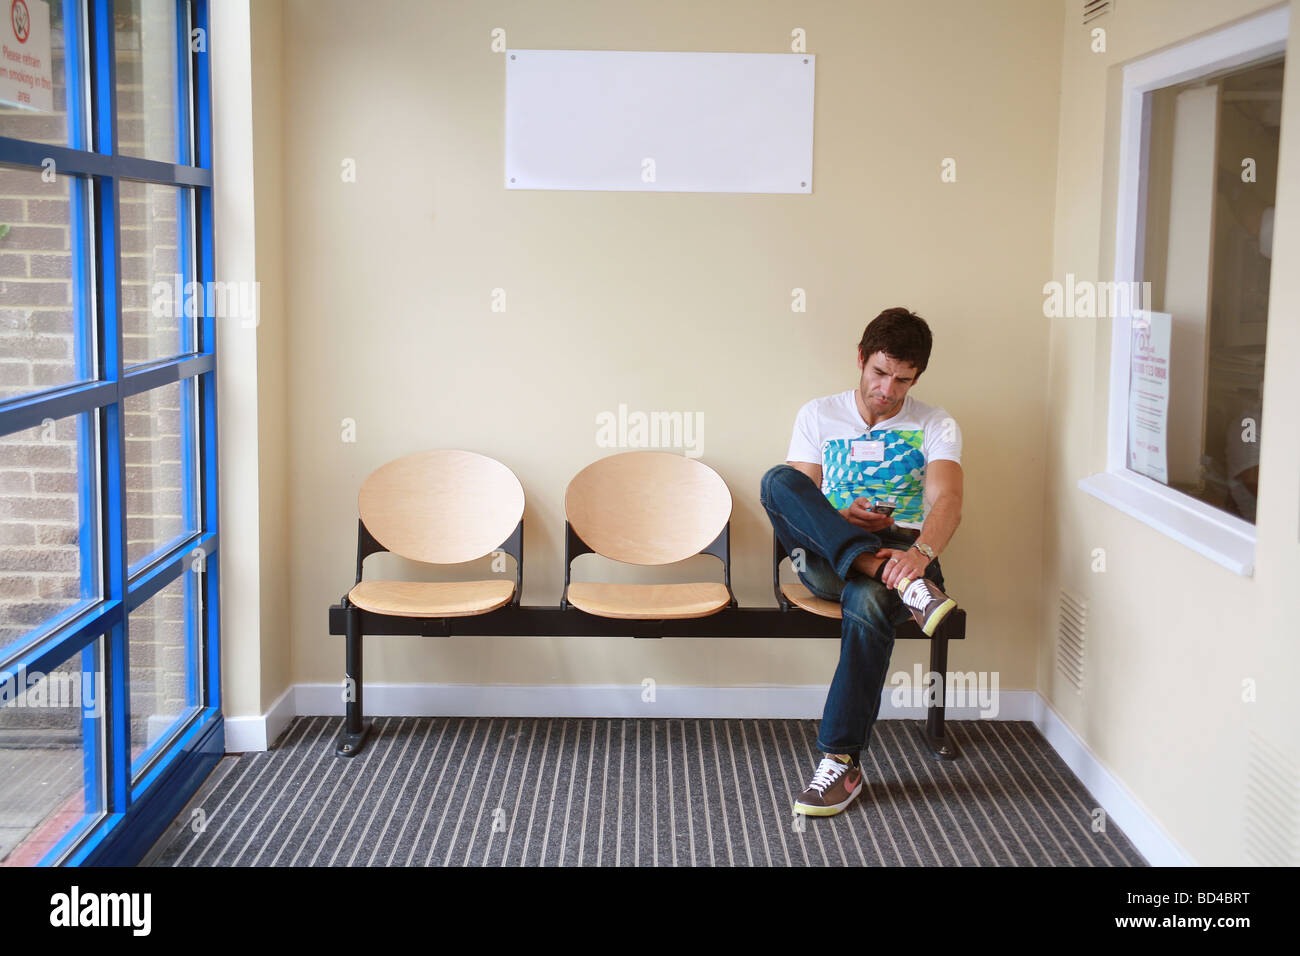 white adult male in a waiting room sending texts on his mobile phone Stock Photo